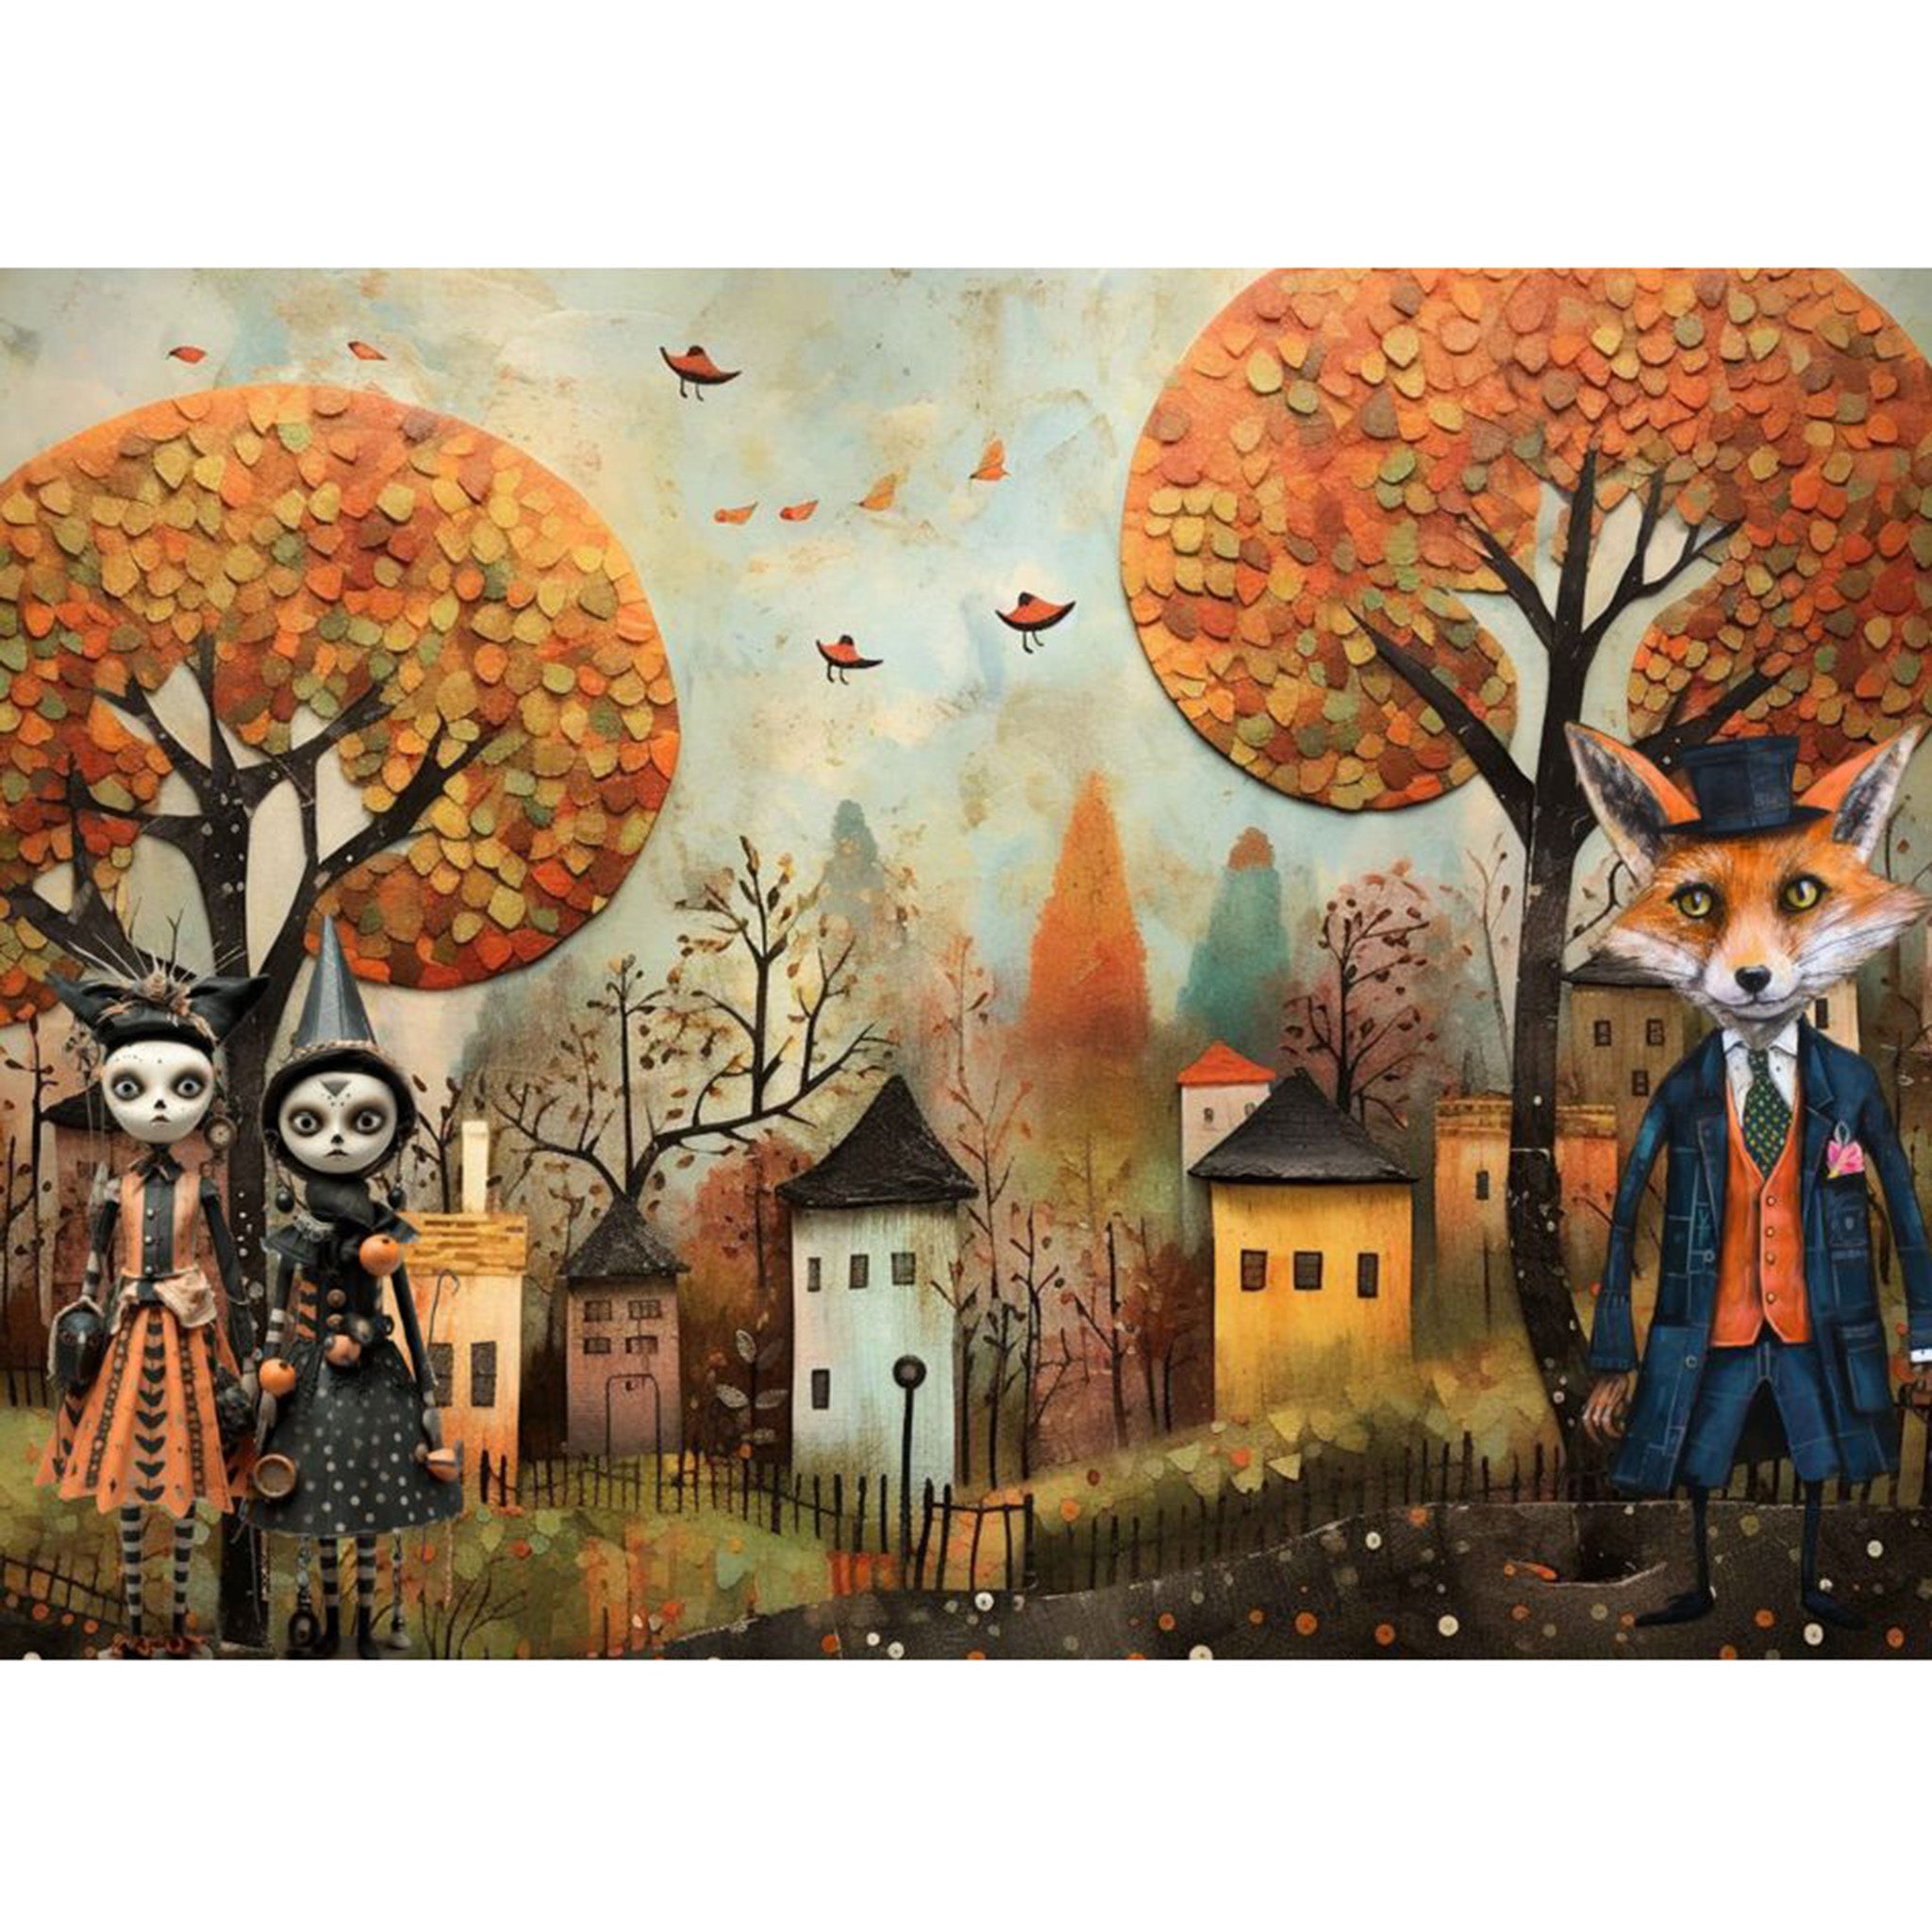 Tissue paper design featuring 2 charmingly creepy witches and a dapper fox in a suit, all set against a small town scene. White borders are on the top and bottom.